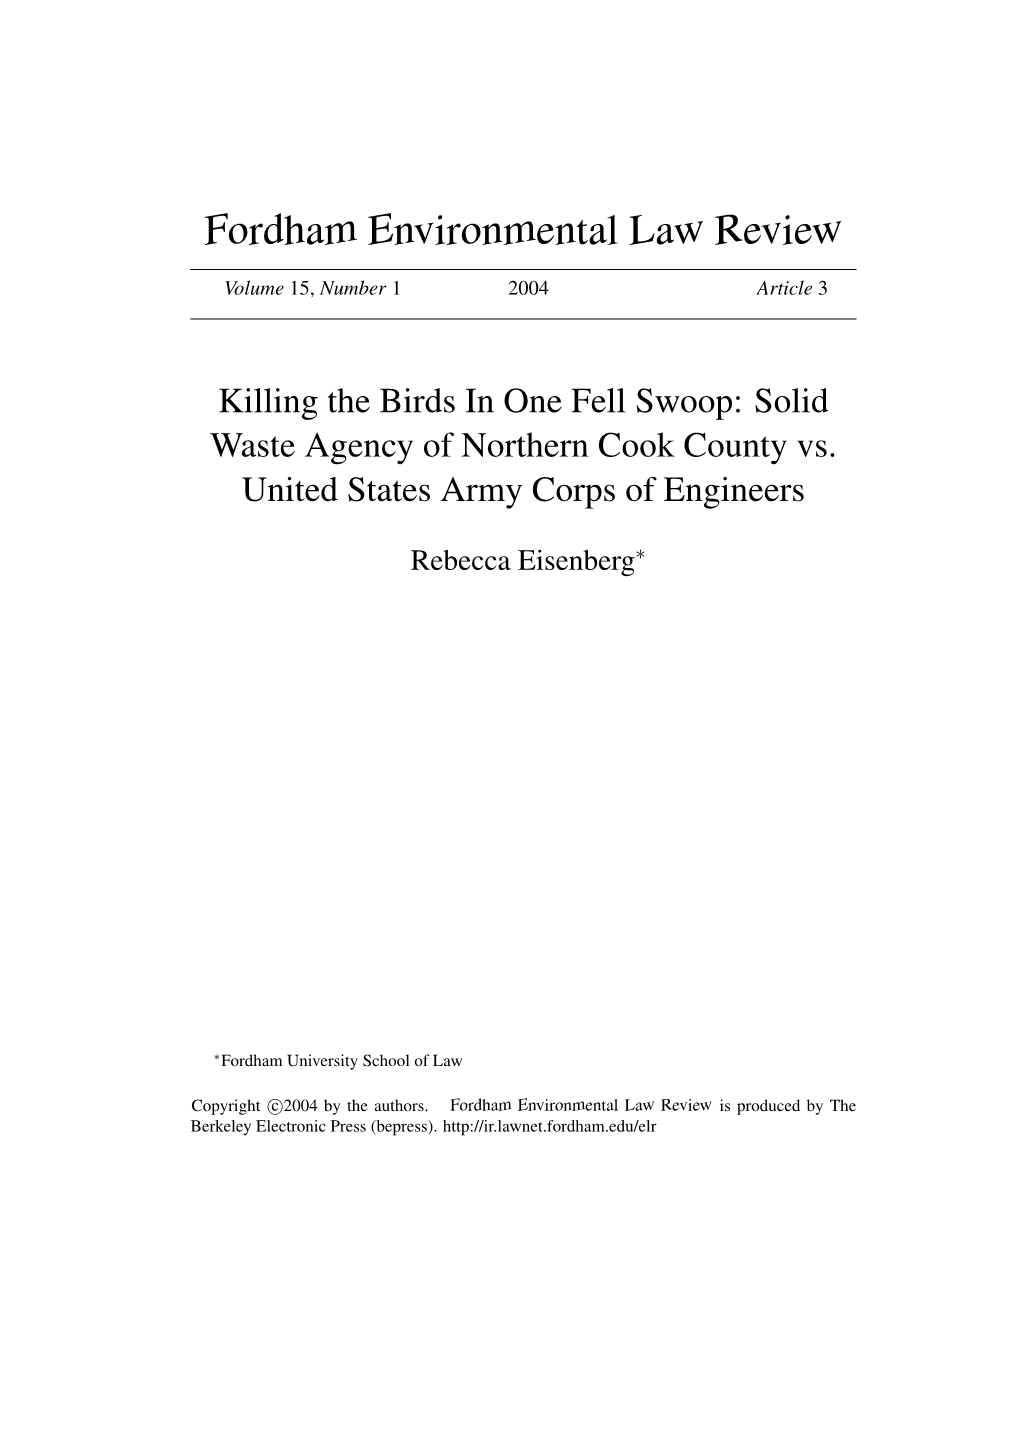 Killing the Birds in One Fell Swoop: Solid Waste Agency of Northern Cook County Vs